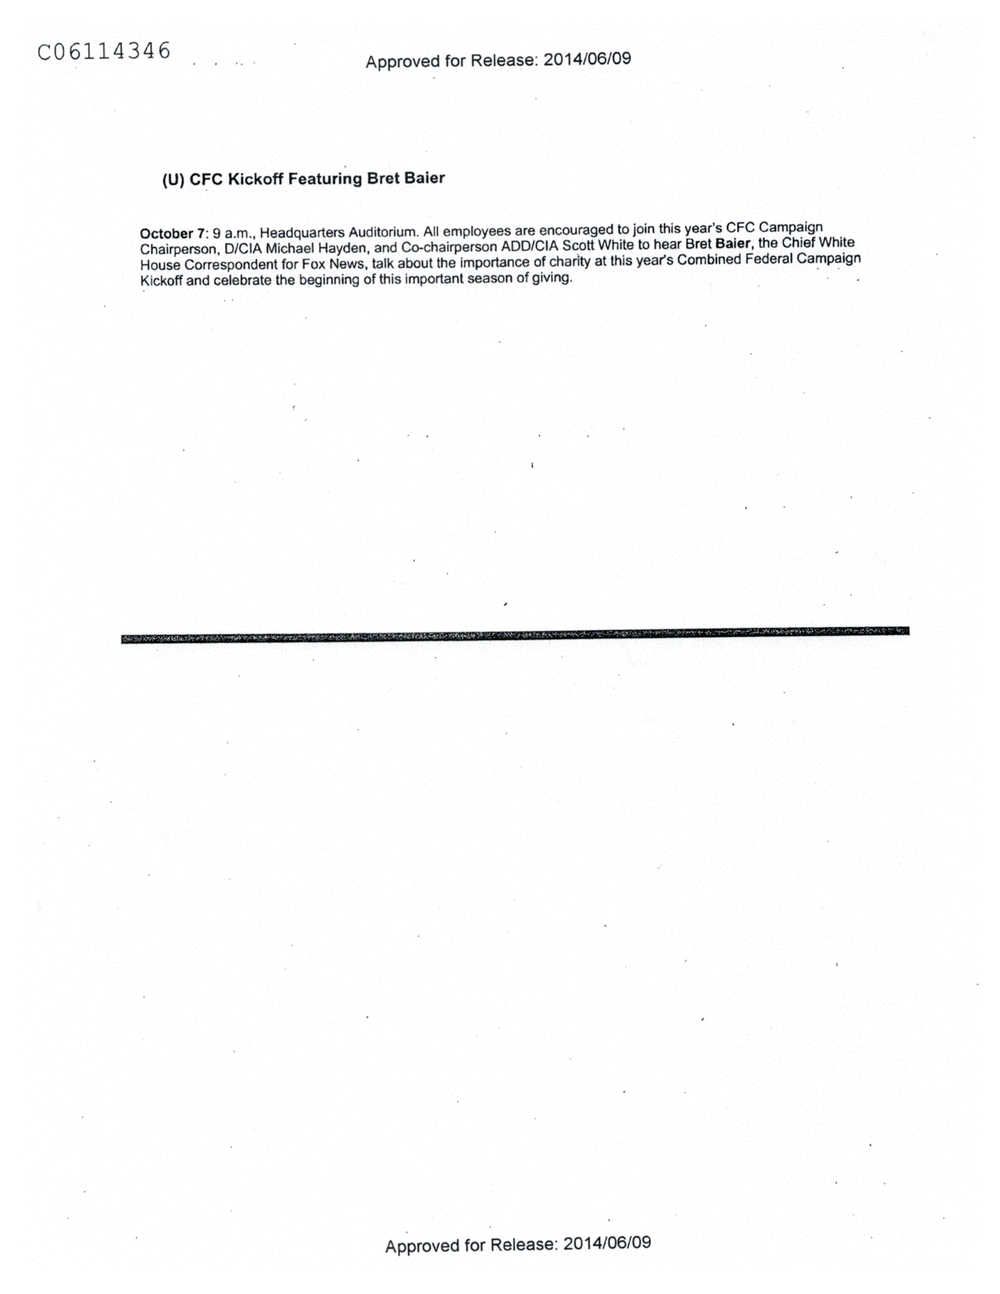 Page 569 from Email Correspondence Between Reporters and CIA Flacks